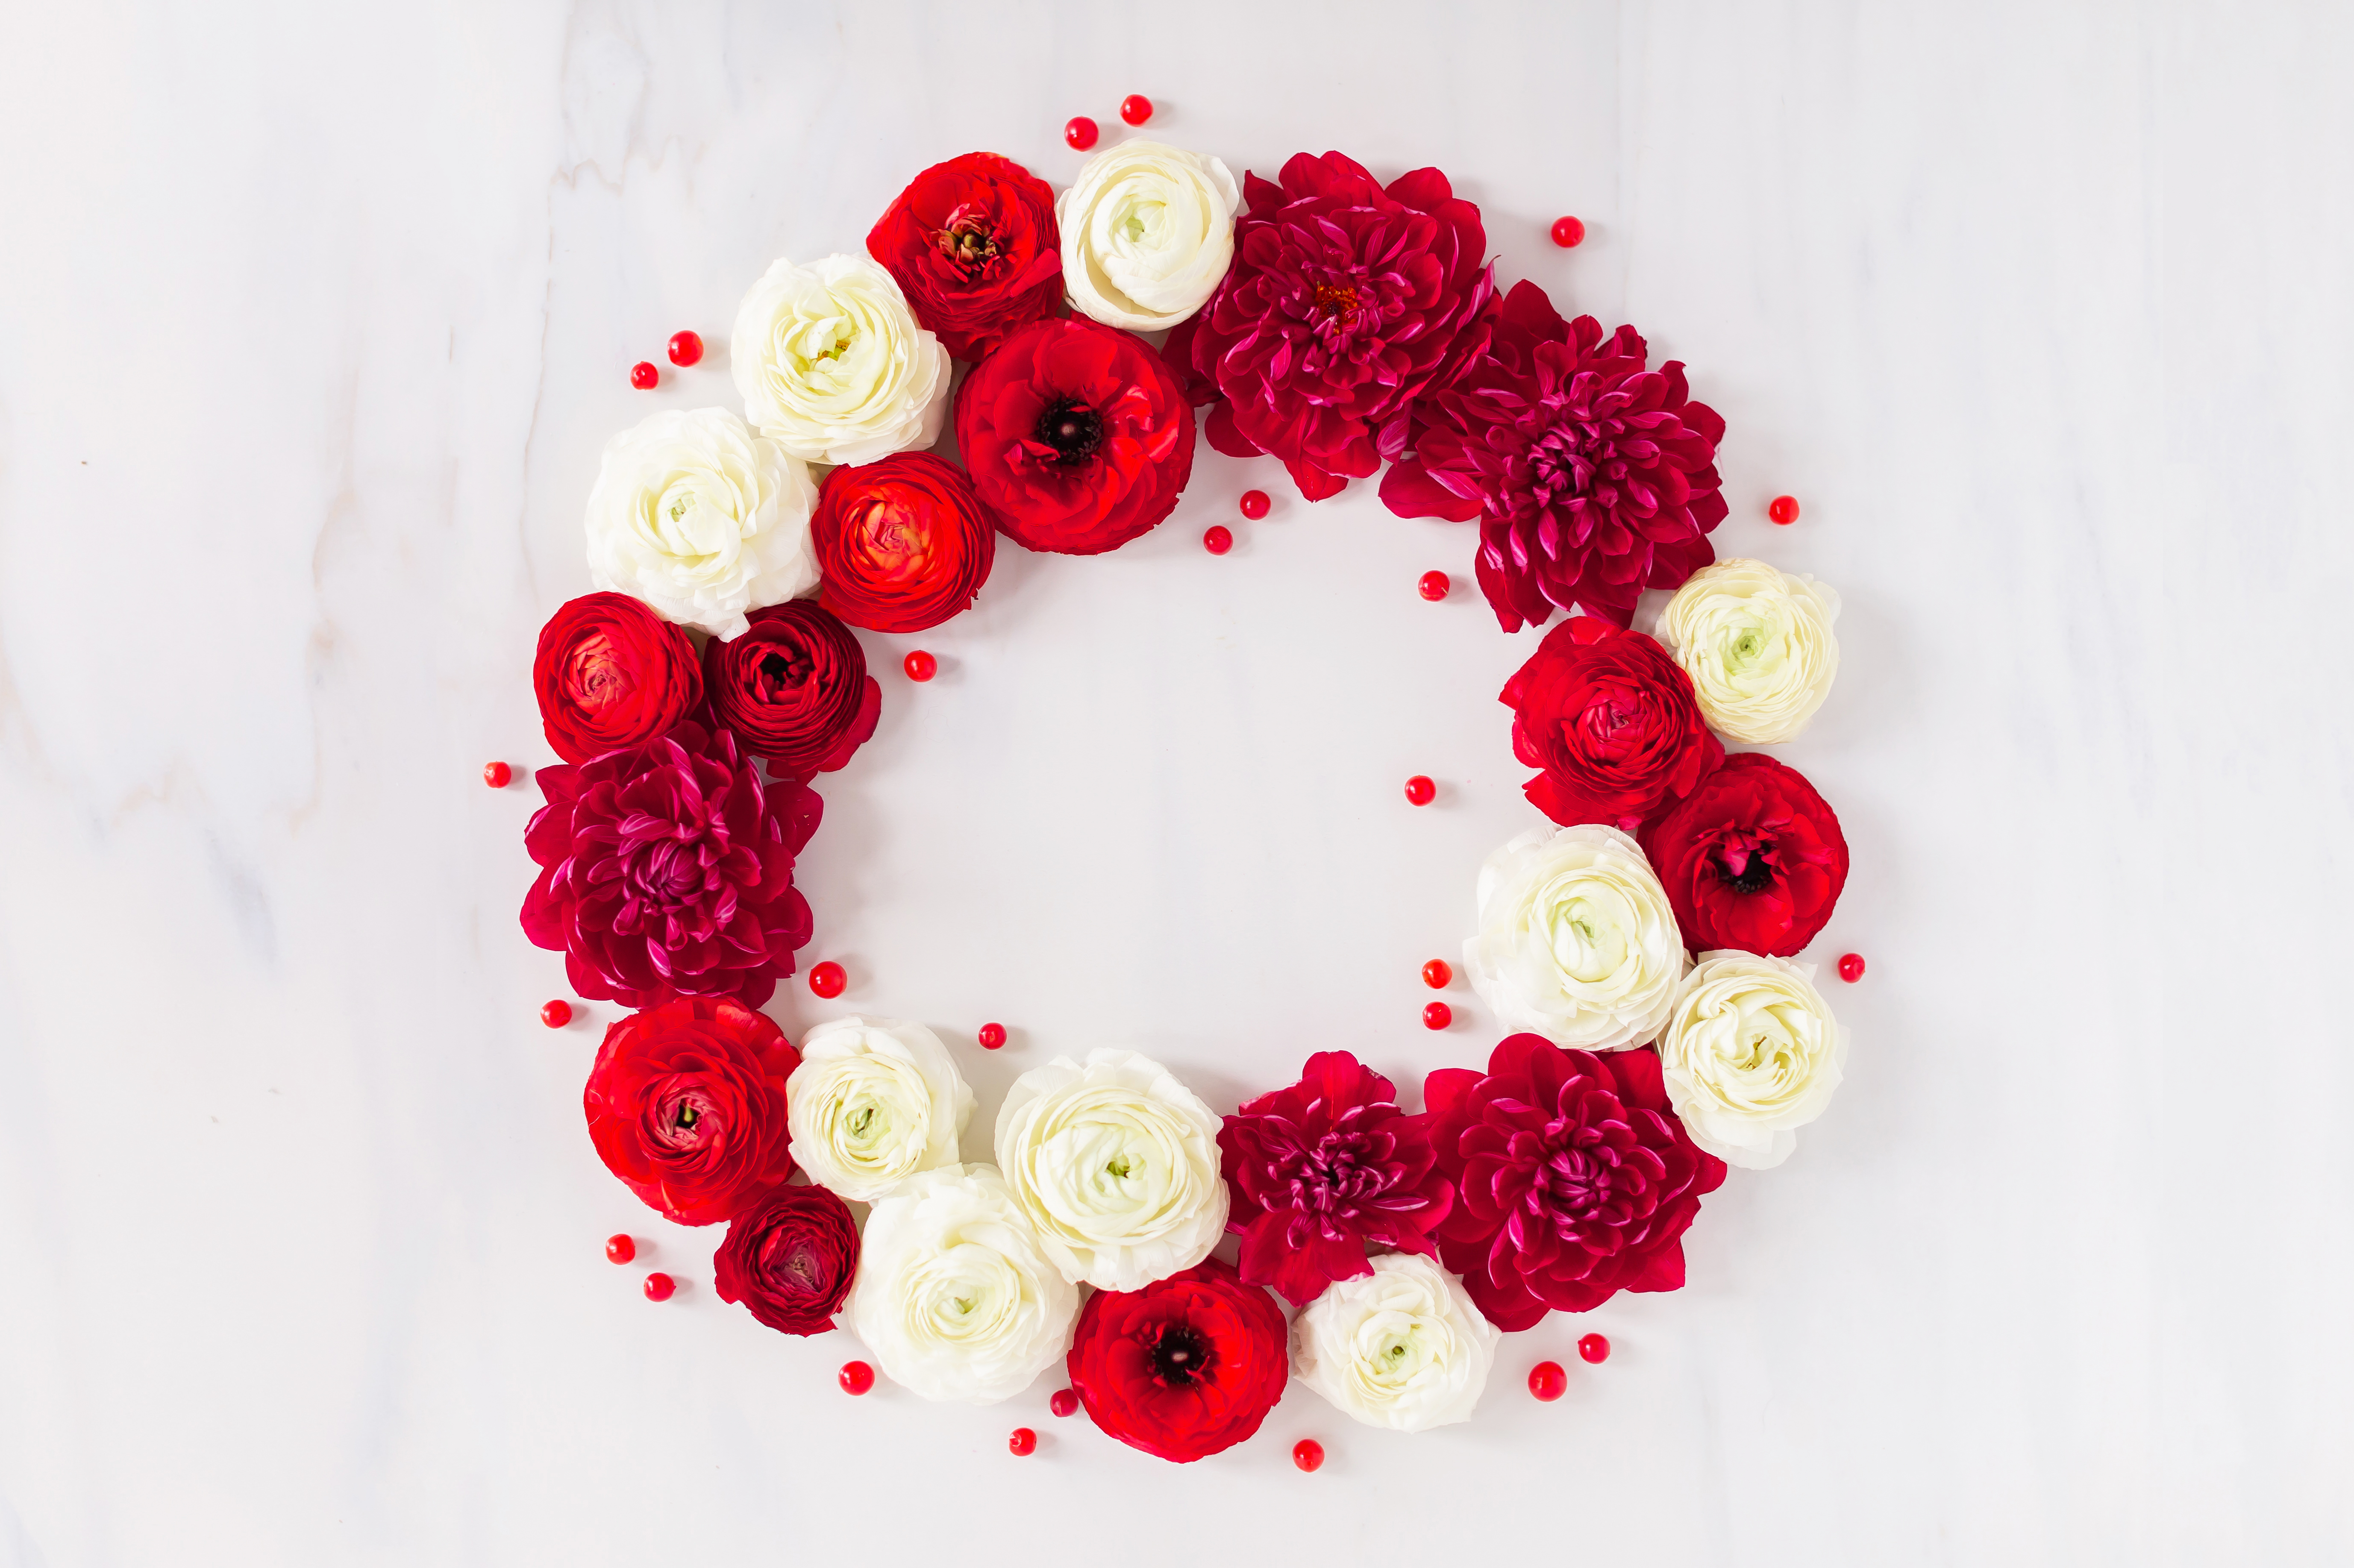 Digital Blooms December 2018 | Free Holiday Floral Desktop Wallpapers | A Festive, Red Christmas Wreath made with Ranunculus, Chrysanthemums, Berries and Twigs | Pantone Fall / Winter 2018 Free Tech Wallpapers | Design 3 // JustineCelina.com x Rebecca Dawn Design